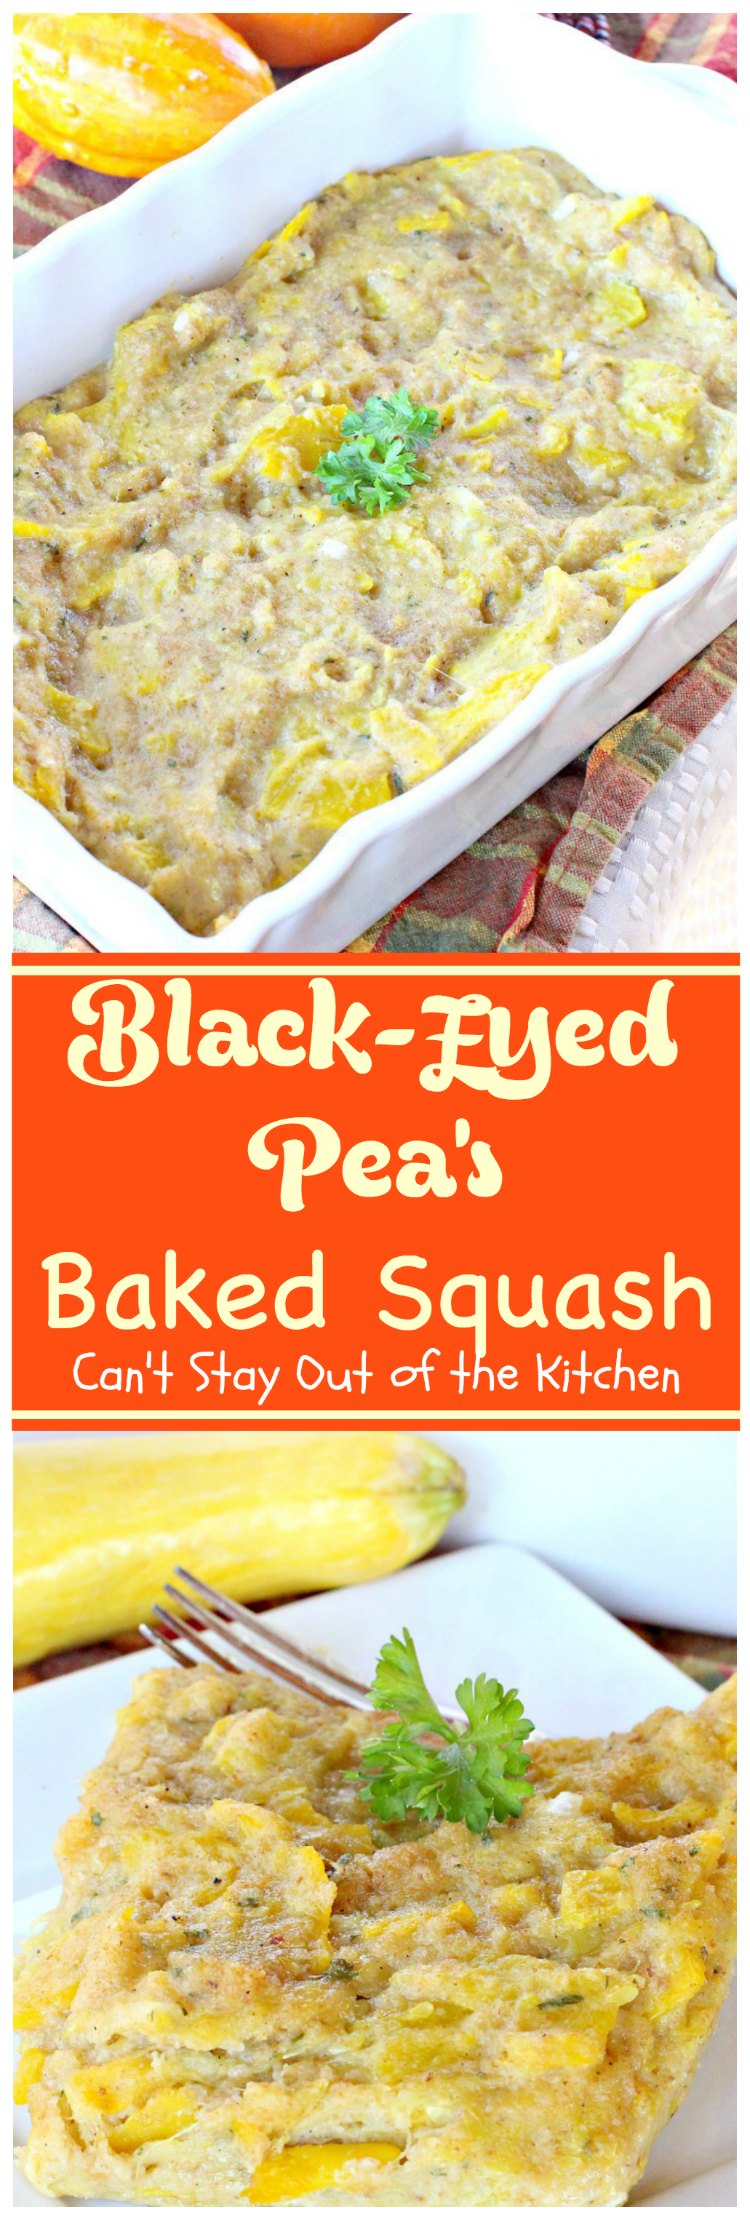 Black-Eyed Pea's Baked Squash | Can't Stay Out of the Kitchen